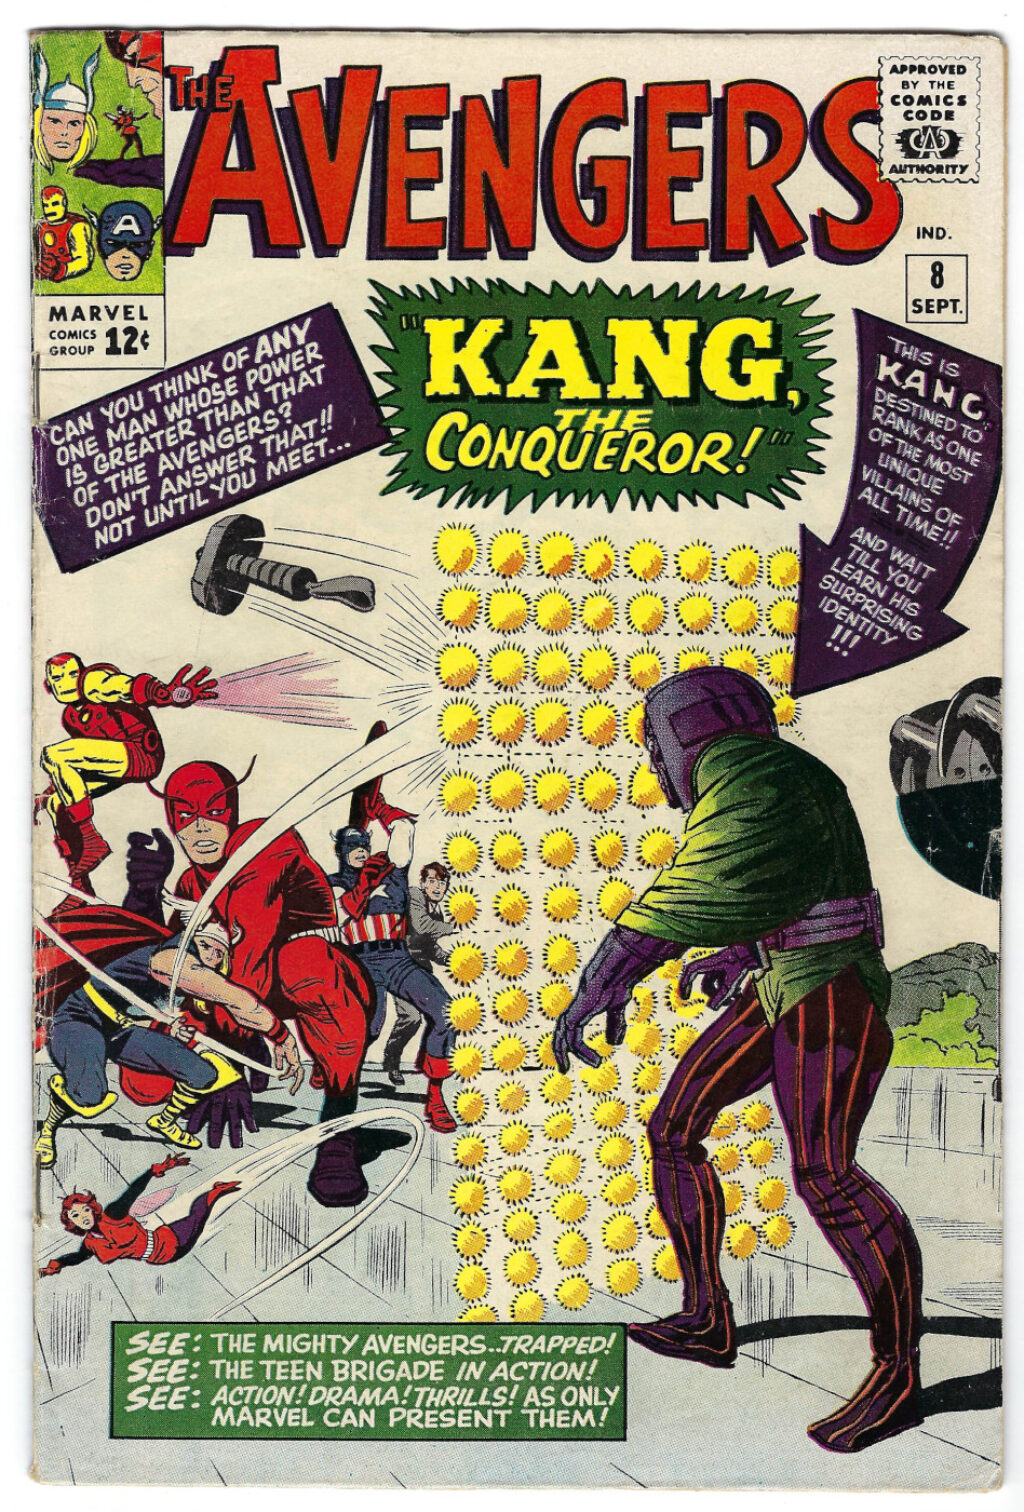 Marvel Comics 1963 Avengers #8: 1st Appearance of Kang the Conqueror 1